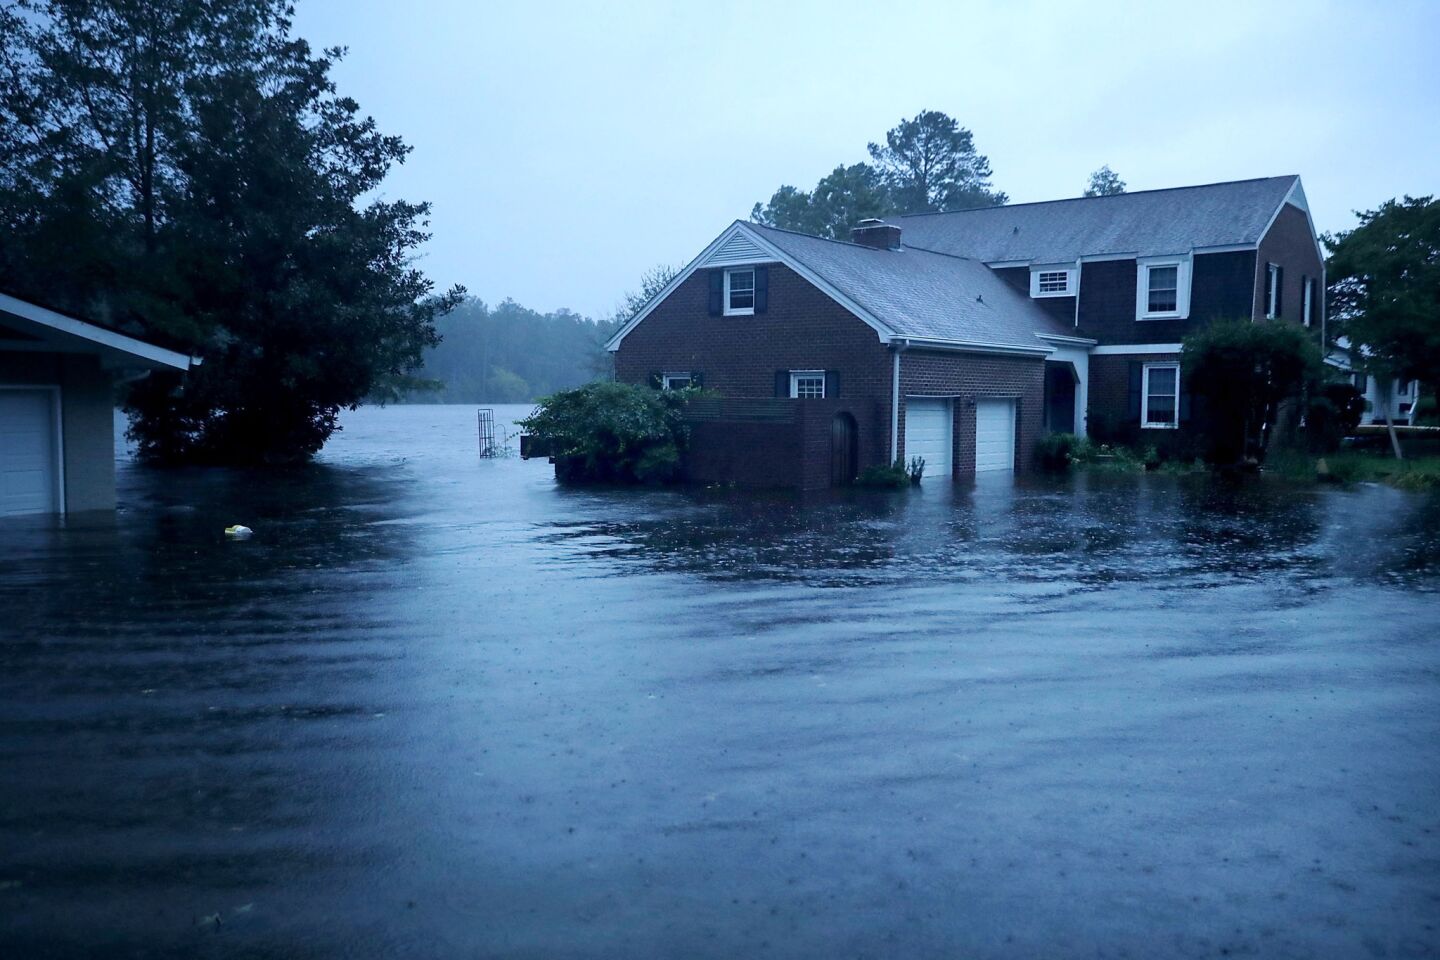 The Trent River (background) overflows its banks and floods a neighborhood during Hurricane Florence in River Bend, N.C.